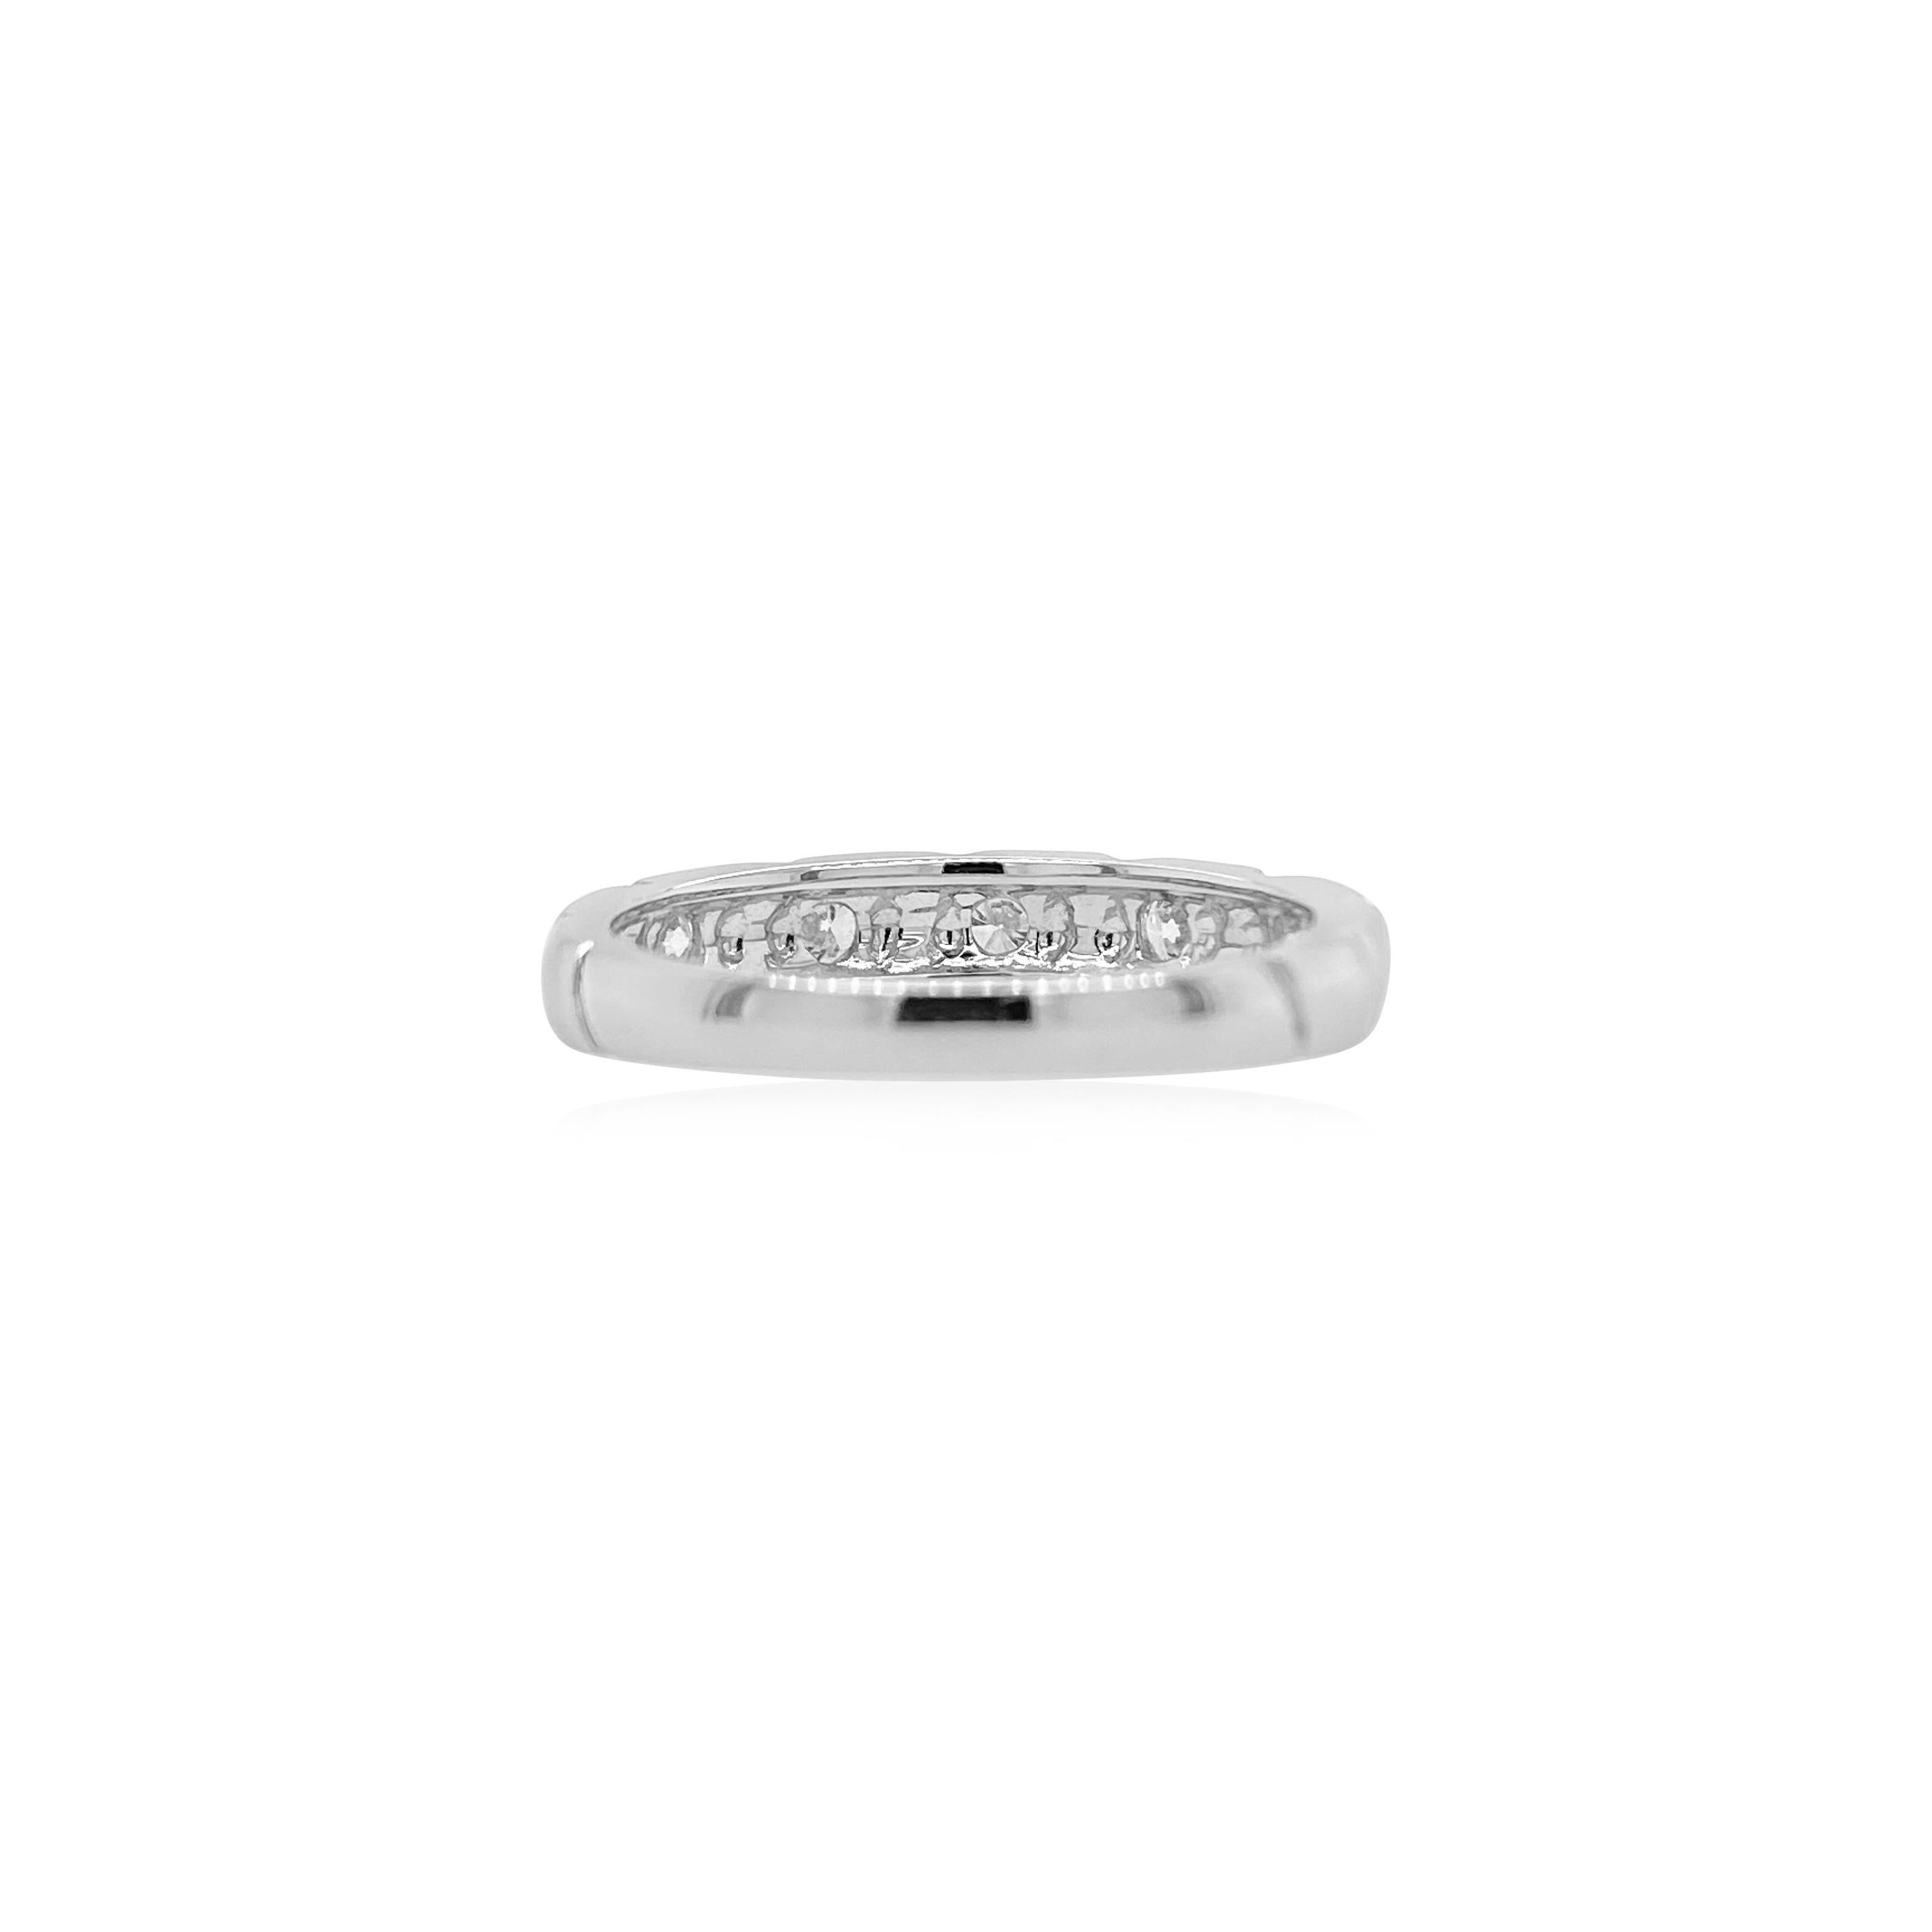 This classic White diamond Band Ring is a perfect everyday jewellery with high quality round brilliant cut white diamonds crafted in 18K white gold 


-	Round Brilliant Cut White Diamonds total 0.40 carat
-	Made in 18K white Gold

HYT Jewelry is a